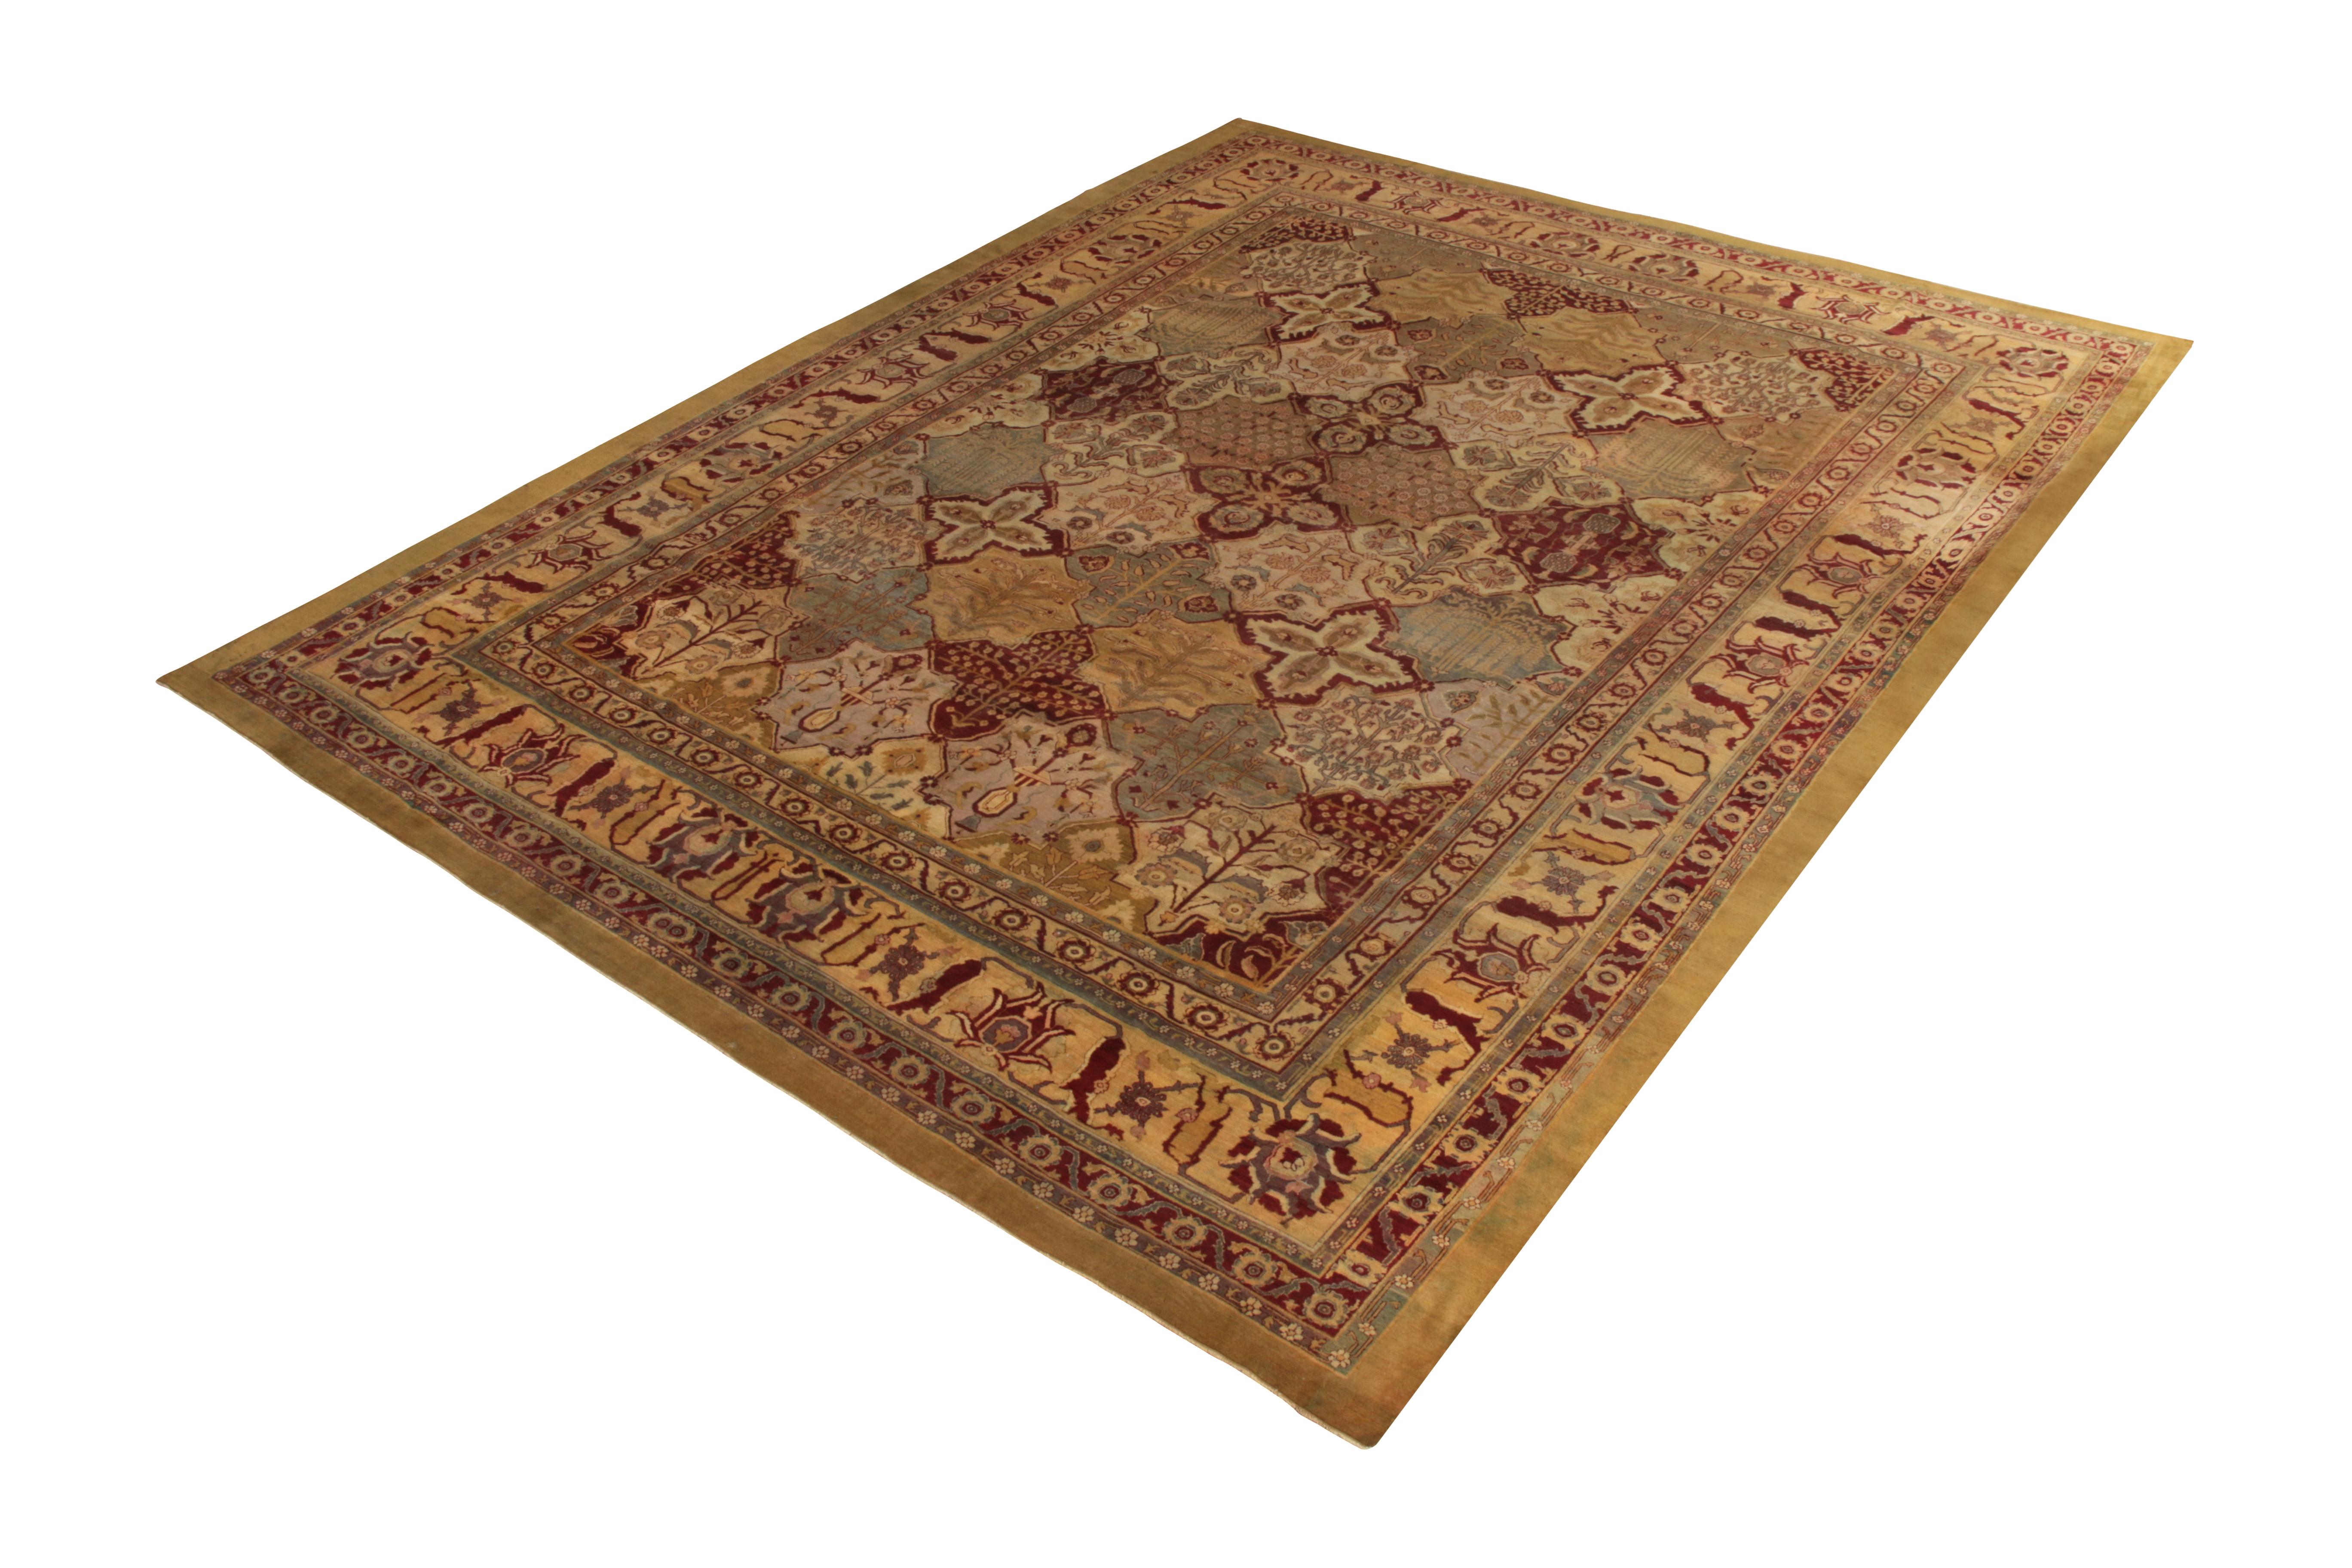 This 12x15 antique Amritsar rug is a rare, regal turn-of-the-century addition to Rug & Kilim's classics, hand-knotted in wool from India circa 1900-1910.

On the Design:

The repeating medallion floral patterns—including noteworthy variations of the